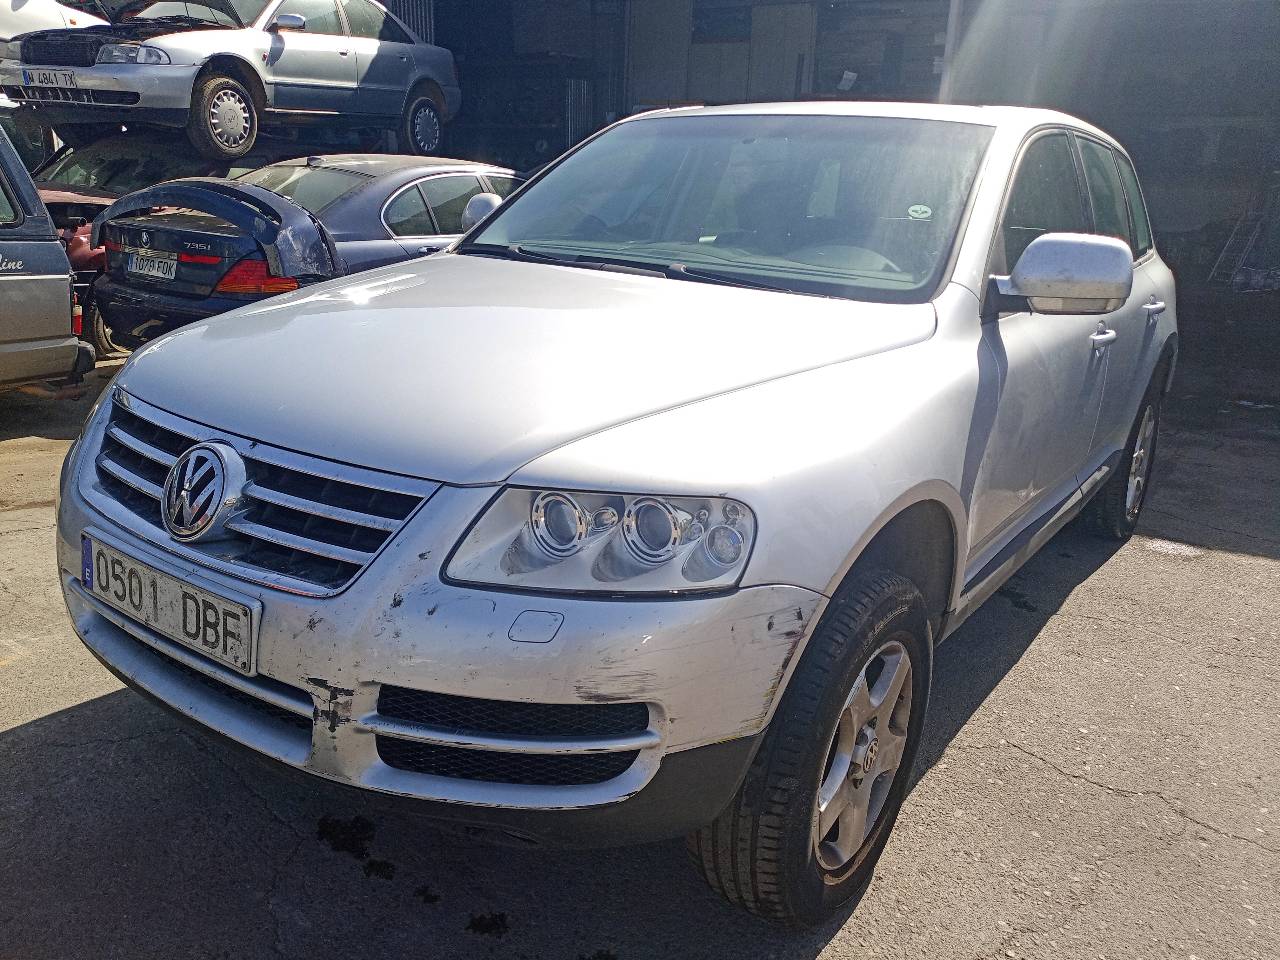 VOLKSWAGEN Touareg 1 generation (2002-2010) Other Engine Compartment Parts 070199308A 22539200